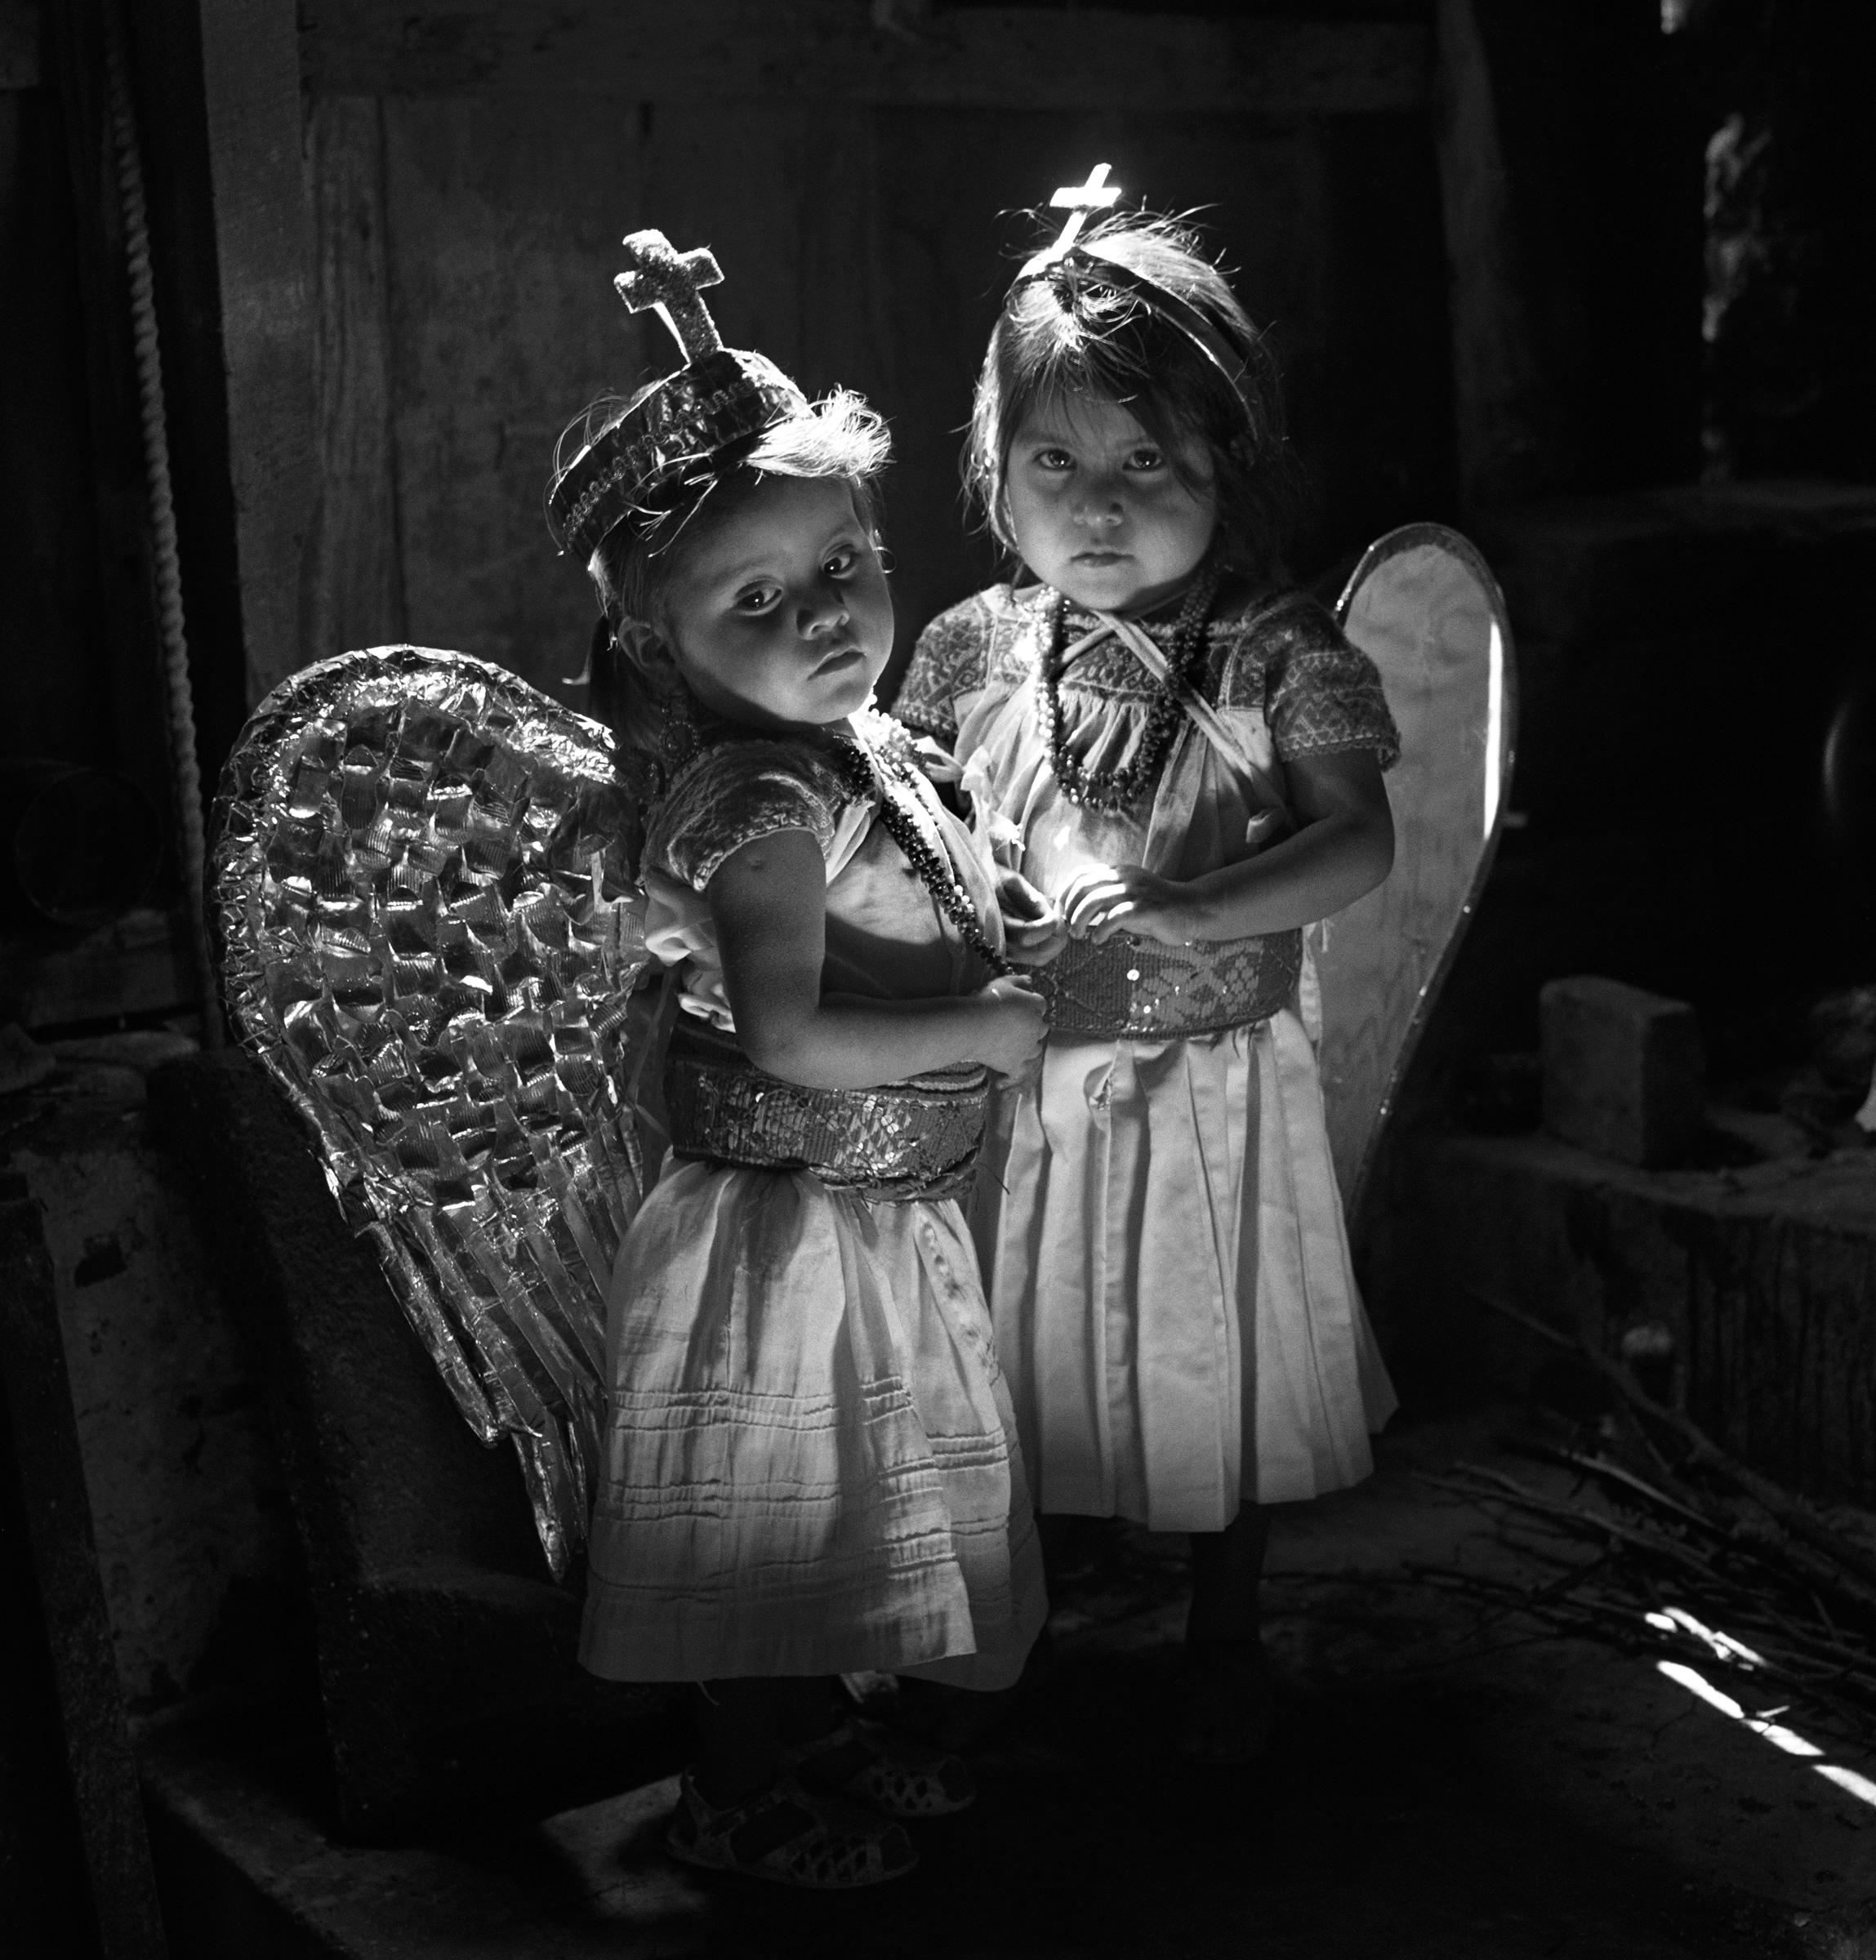 Debbie Fleming Caffery, Debbie Fleming Caffery. Rosa and Guadalupe, Mexico, (angels), 1997 (1998), gelatin silver print. Edition of 25. Image Size: 18.75 x 18.75". Matted: 24 x 24". 

Debbie Fleming Caffery grew up along the Bayou Teche in southwest